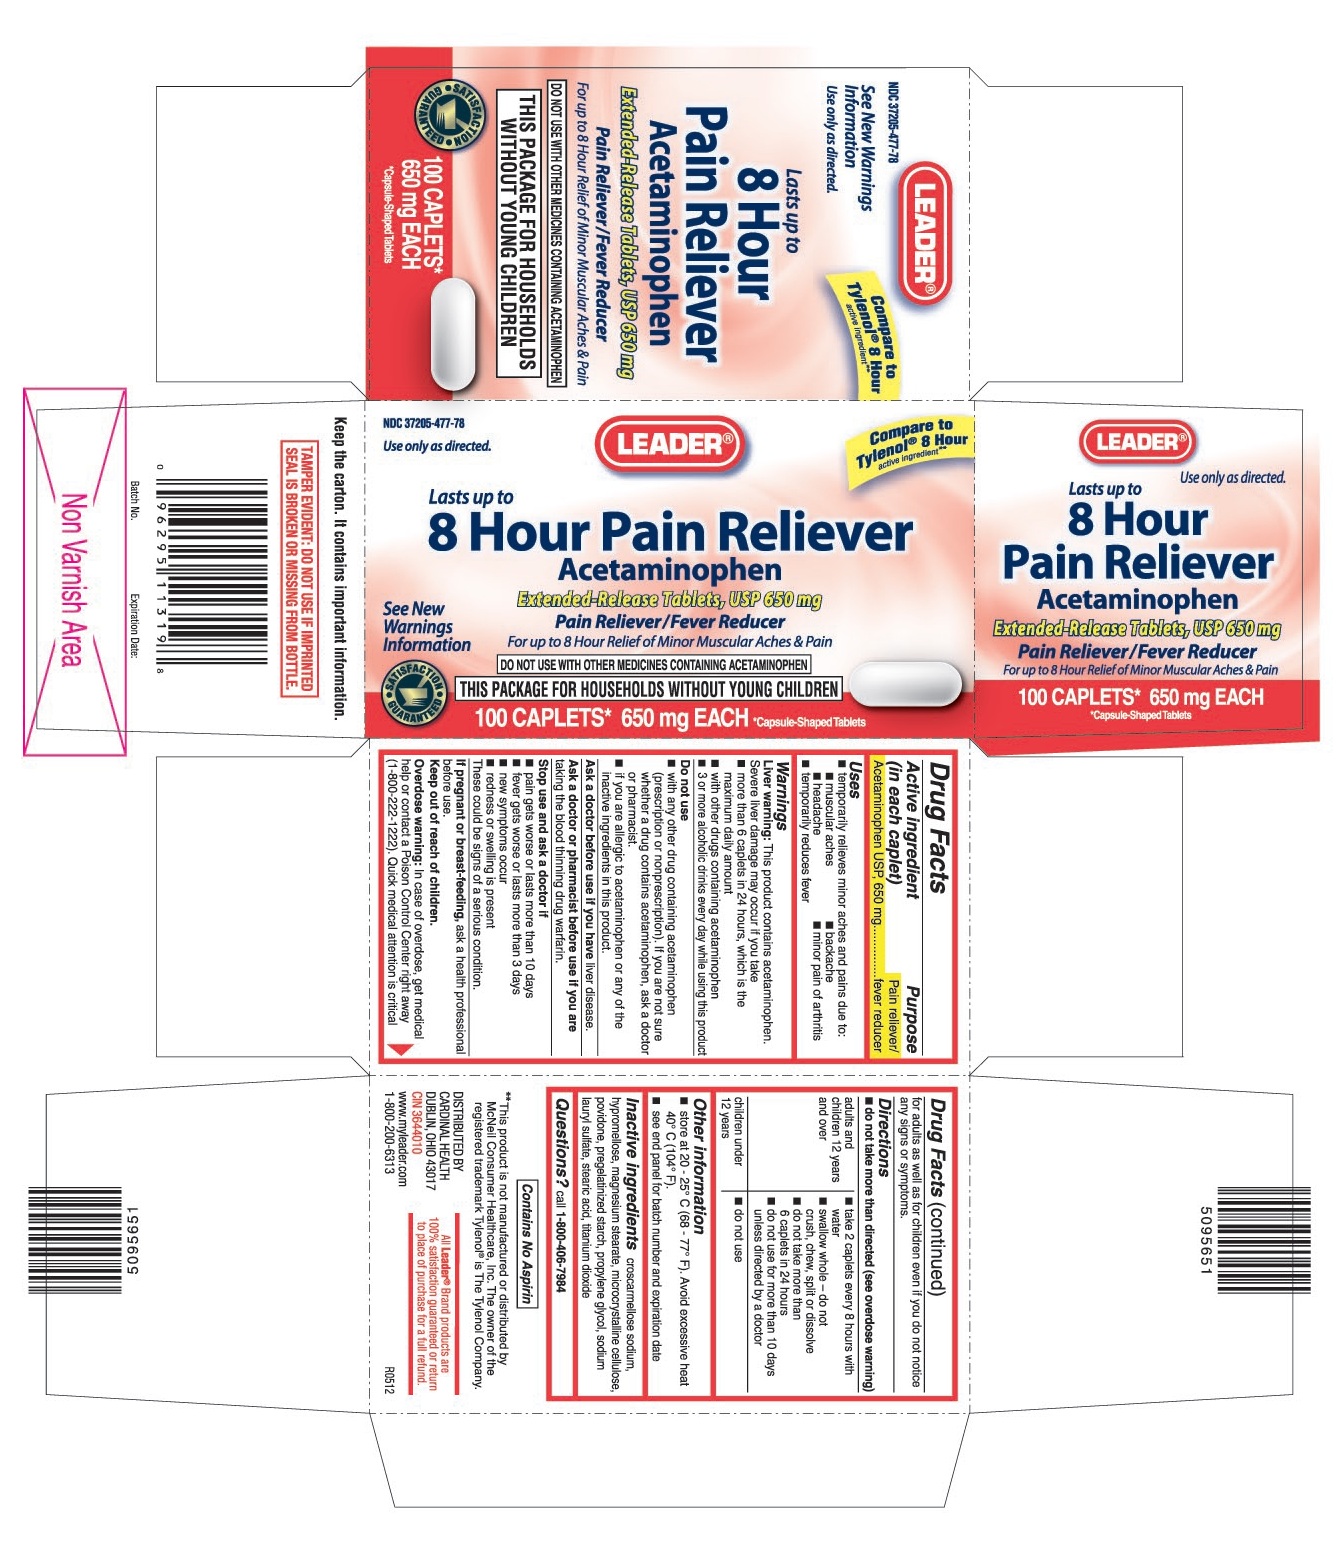 This is the 100 count bottle carton label for Leader Acetaminophen (8 hour) extended-release tablets, USP 650 mg.